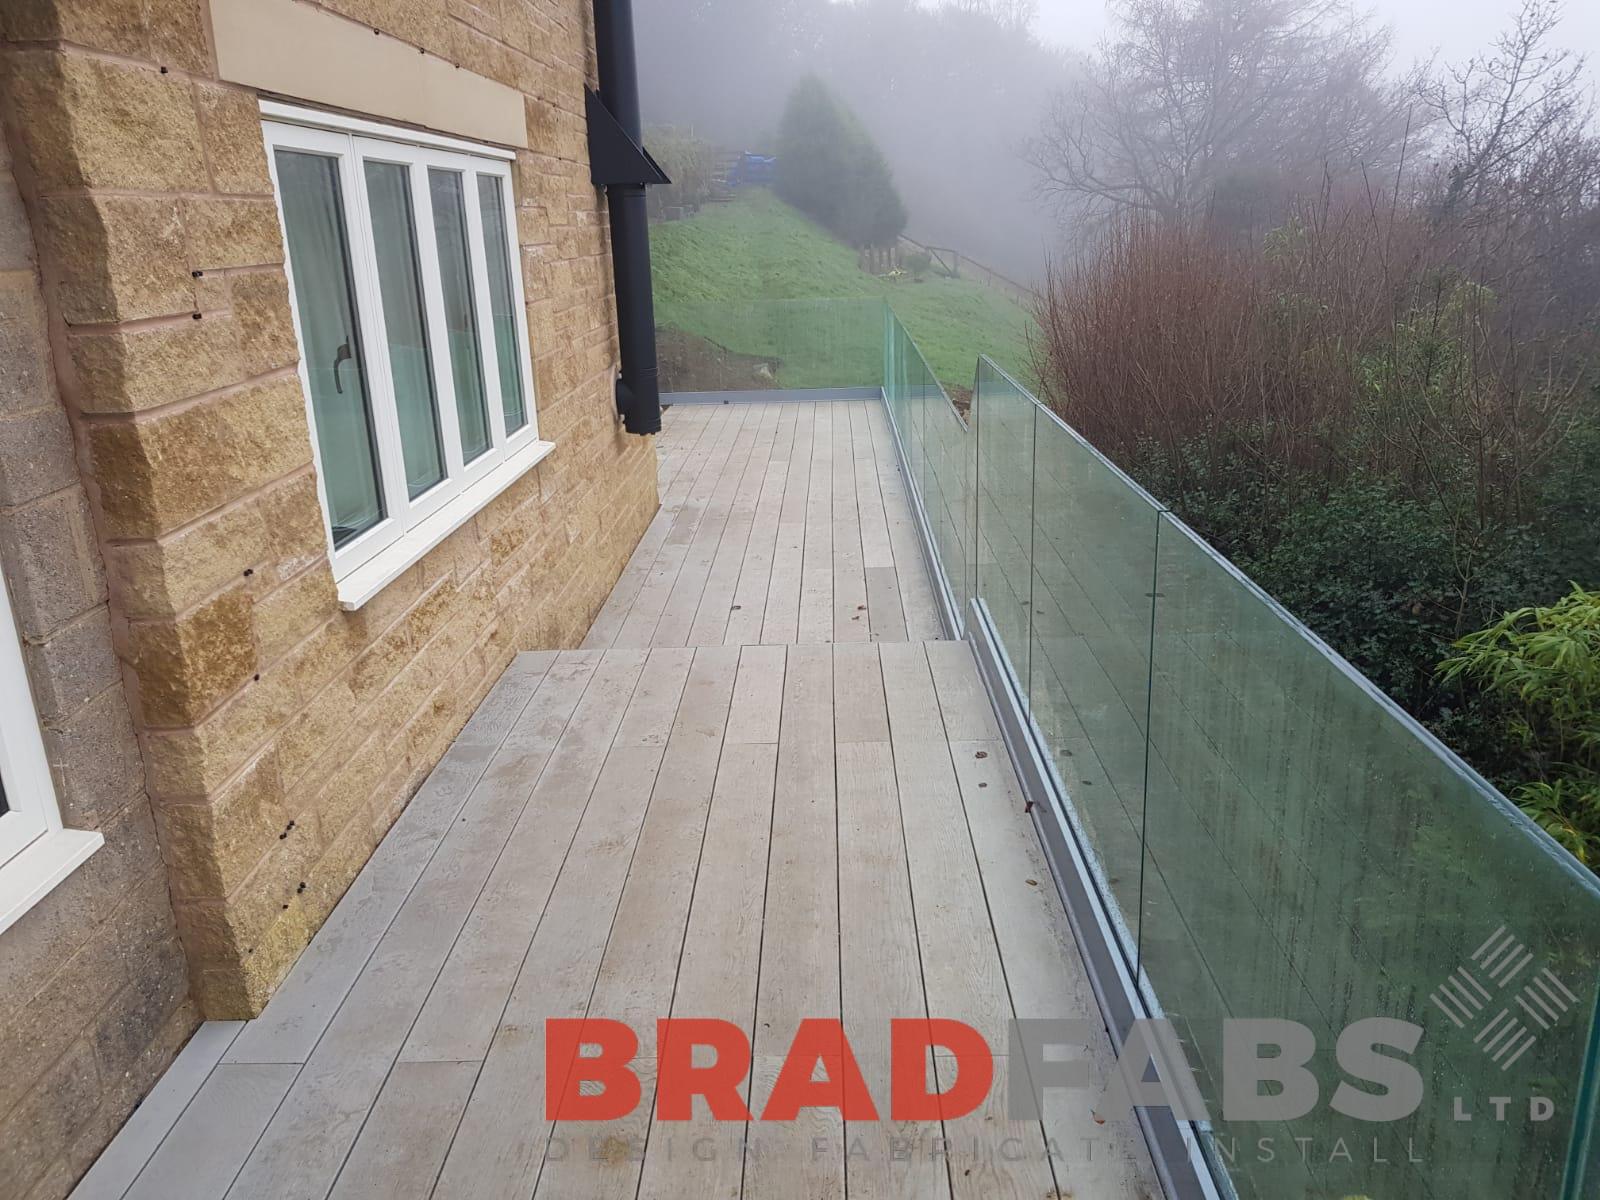 Channel system infinity glass balustrade on a large balcony by Bradfabs